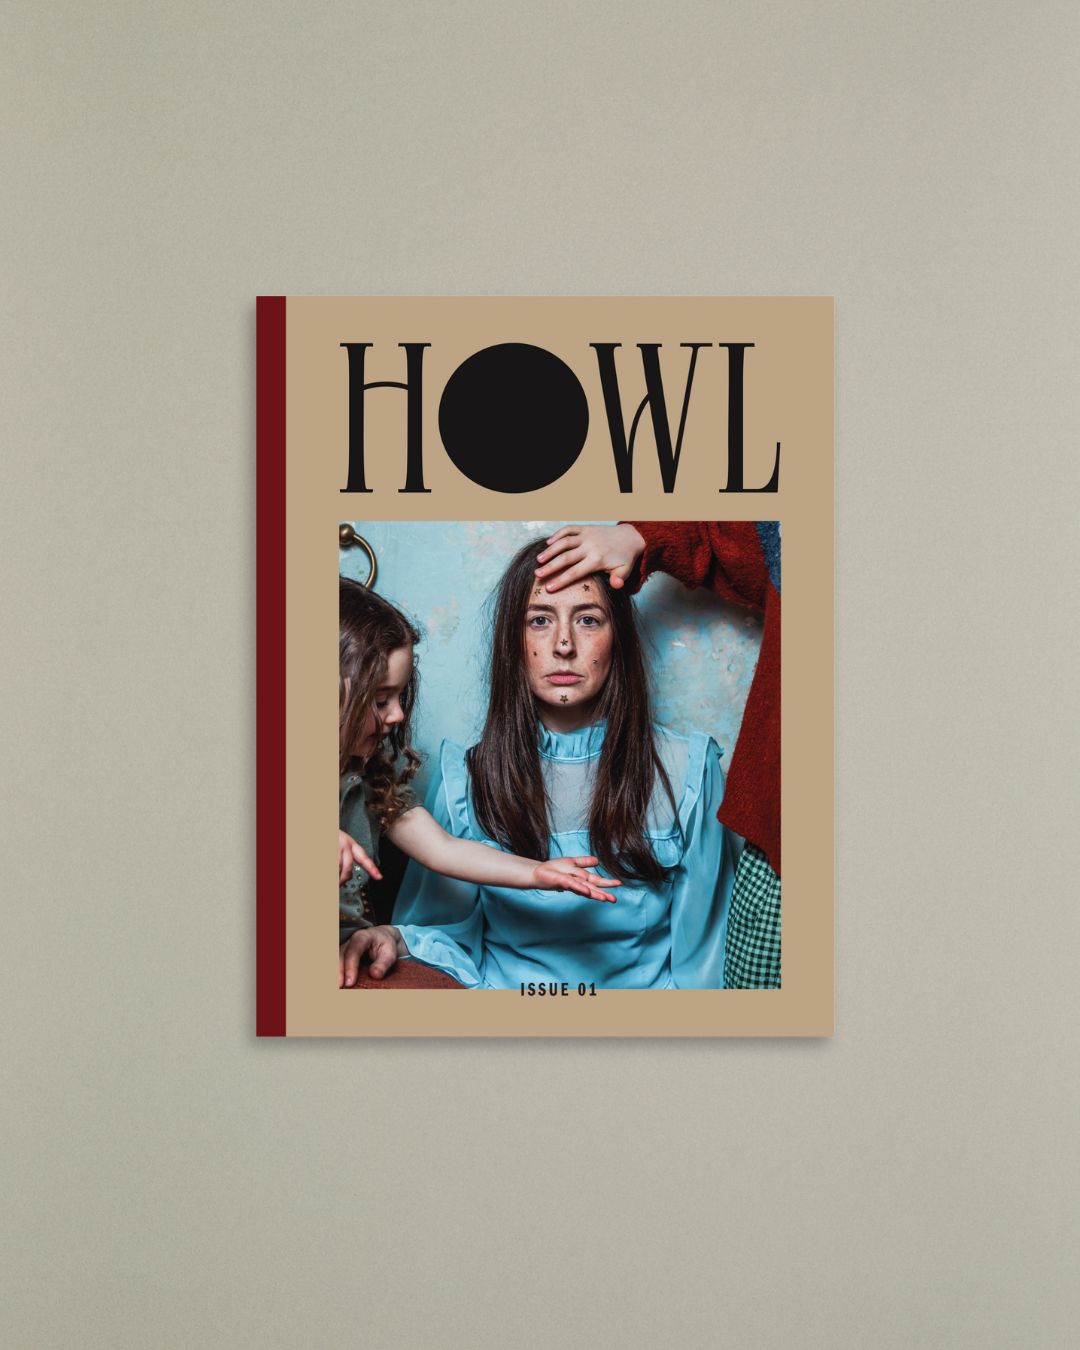 HOWL Issue 01